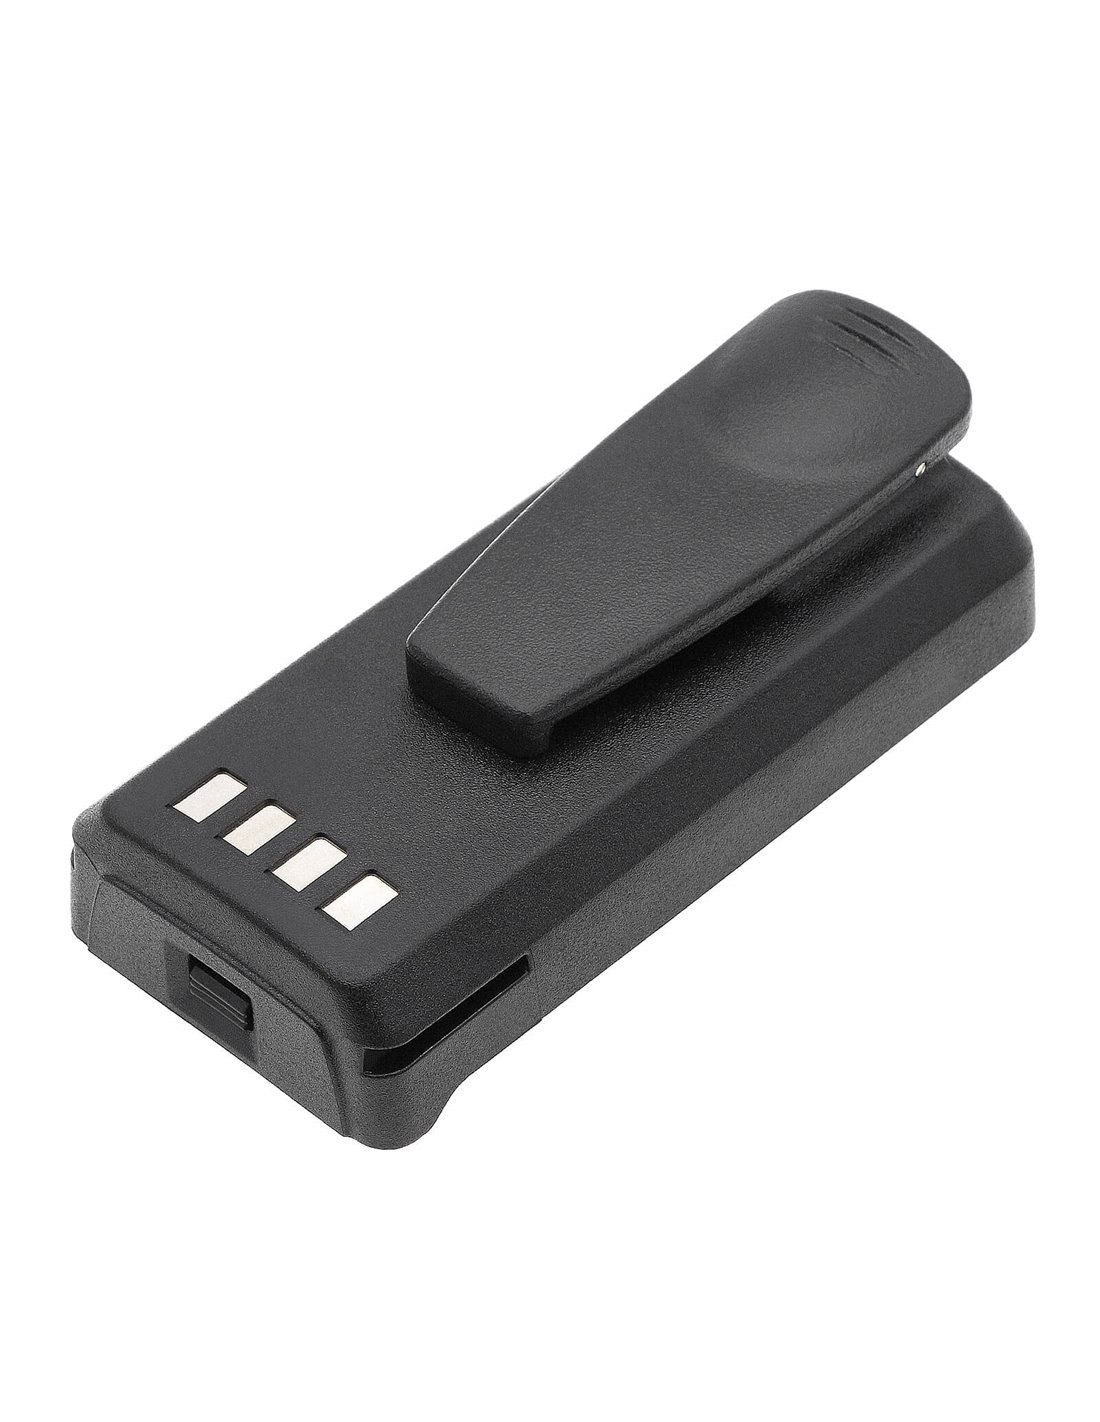 Battery for Motorola Cp1300, Cp1660, Cp185 7.5V, 2600mAh - 19.50Wh